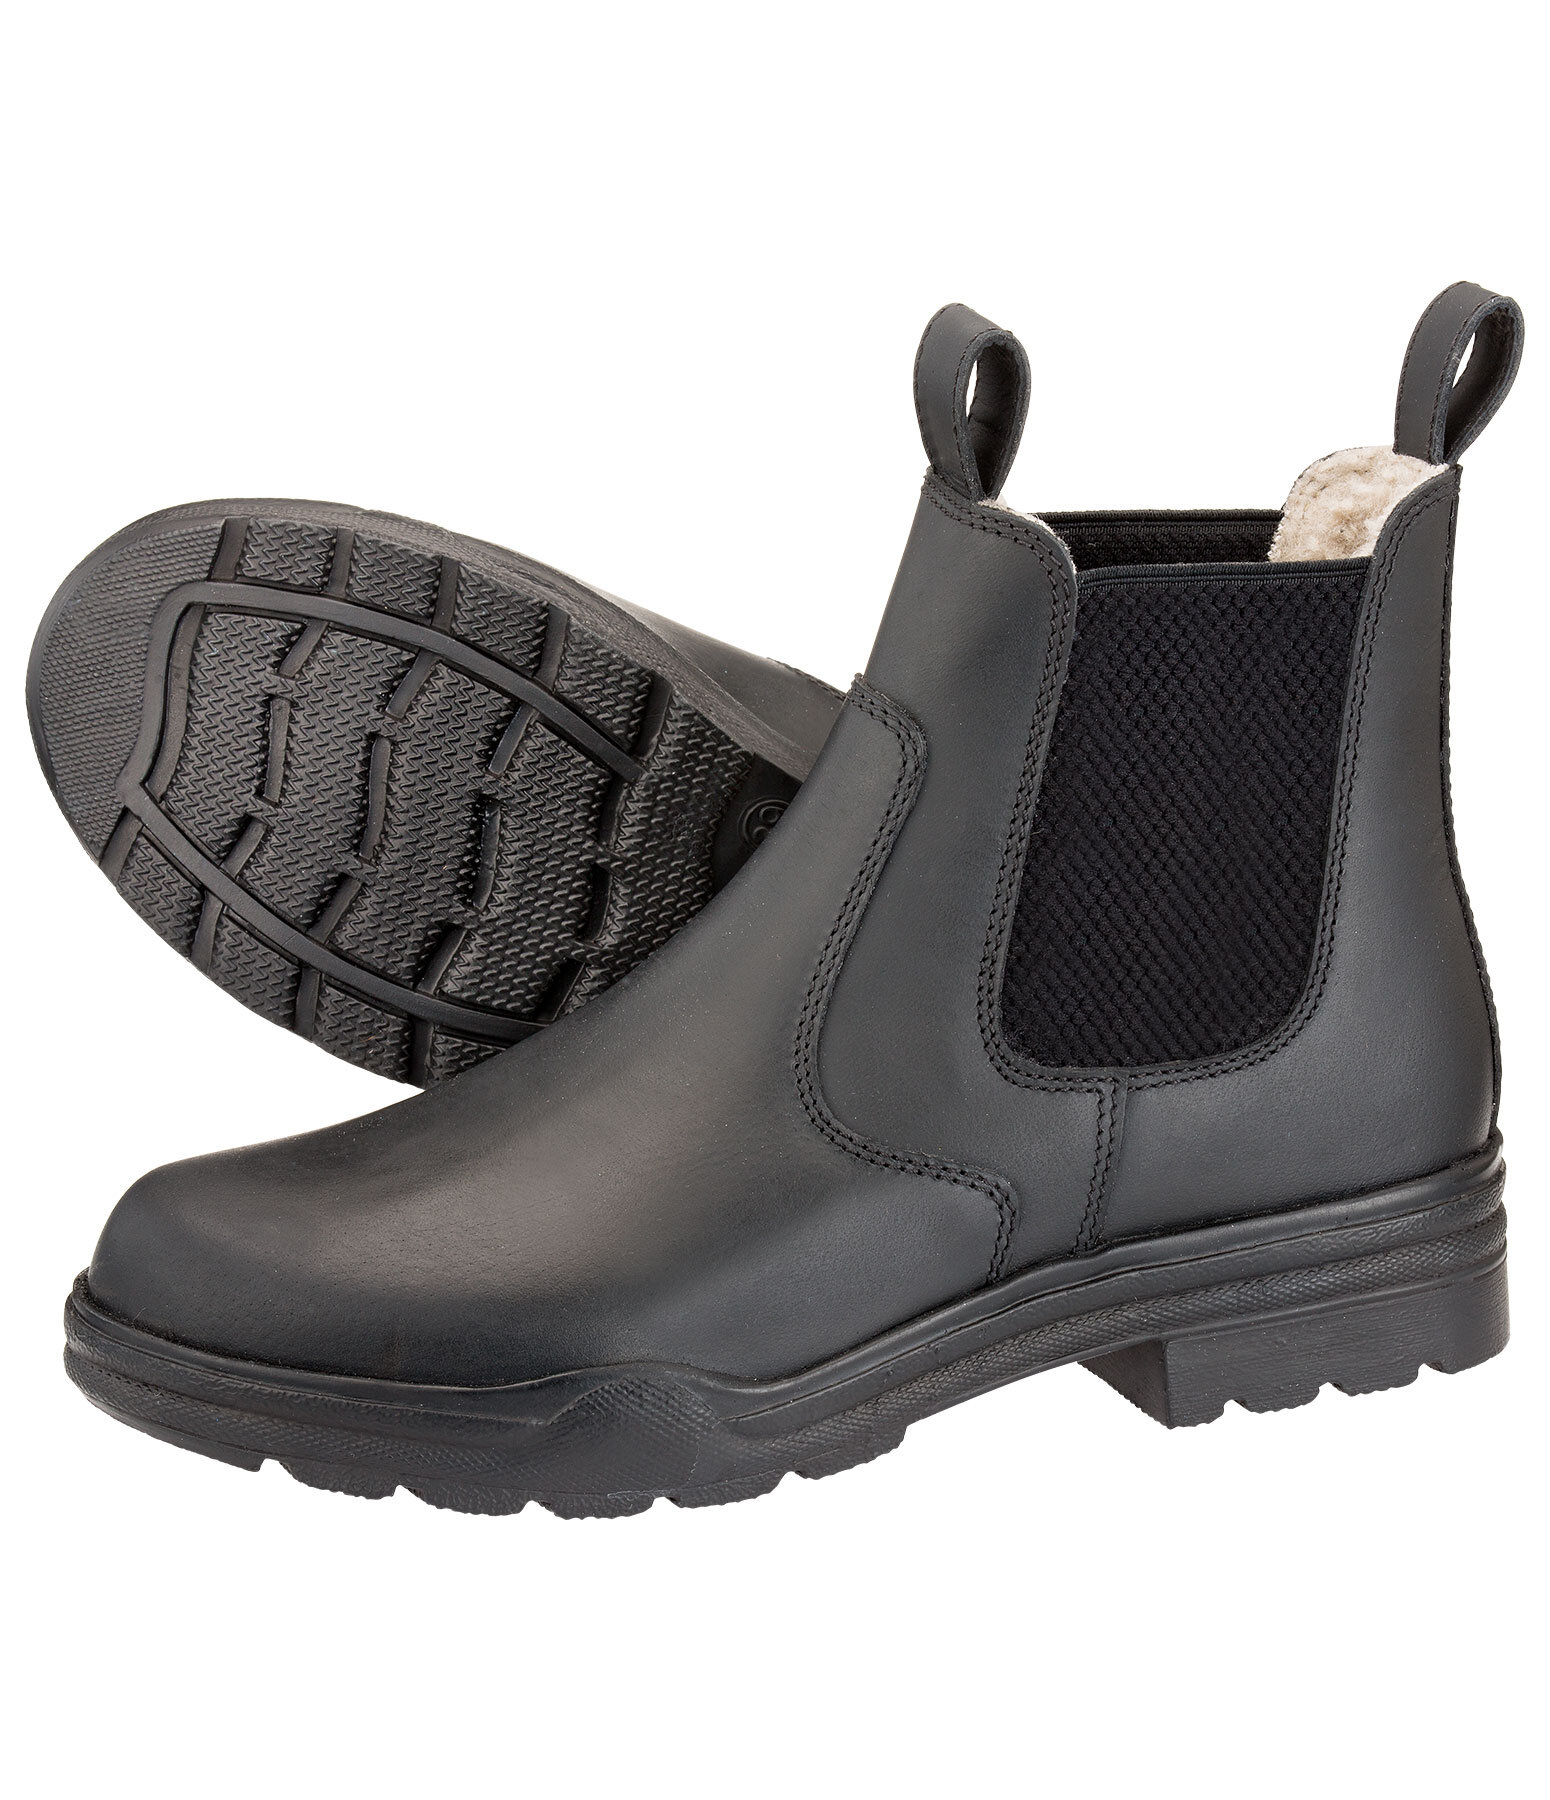 Winter Paddock Boots Stable Master IV